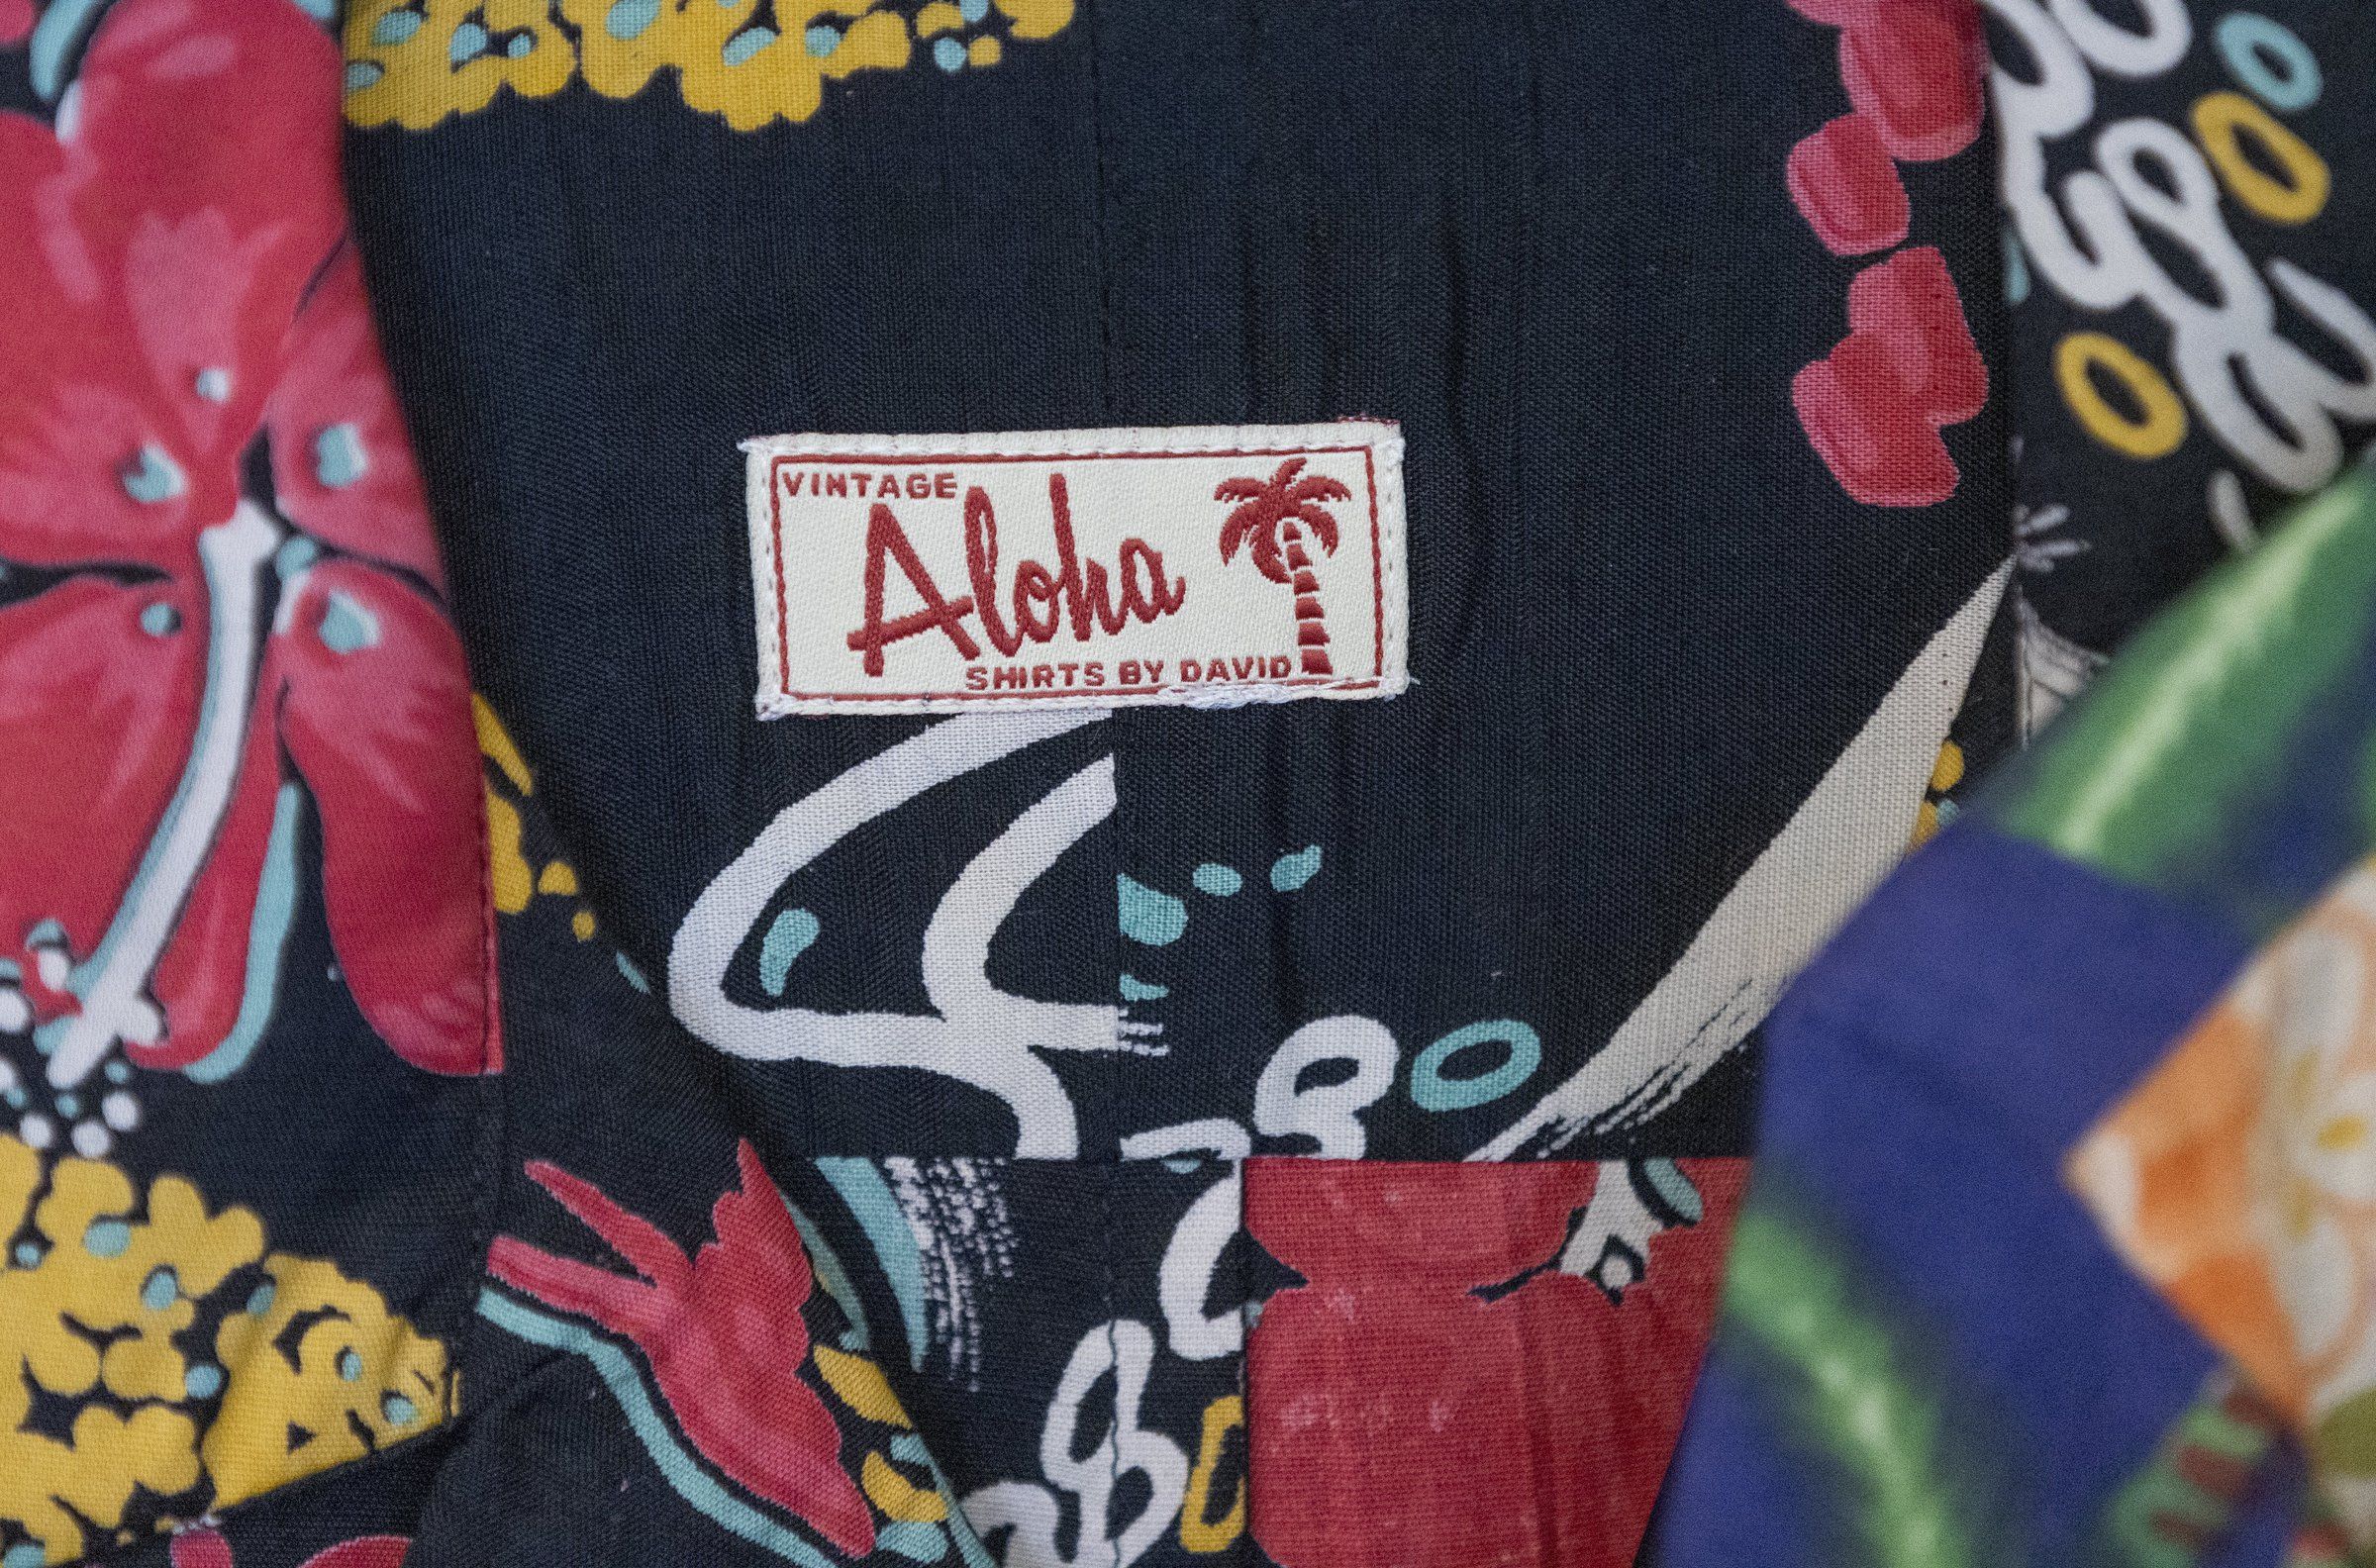 The Aloha shirt is being reclaimed by Polynesian designers | The